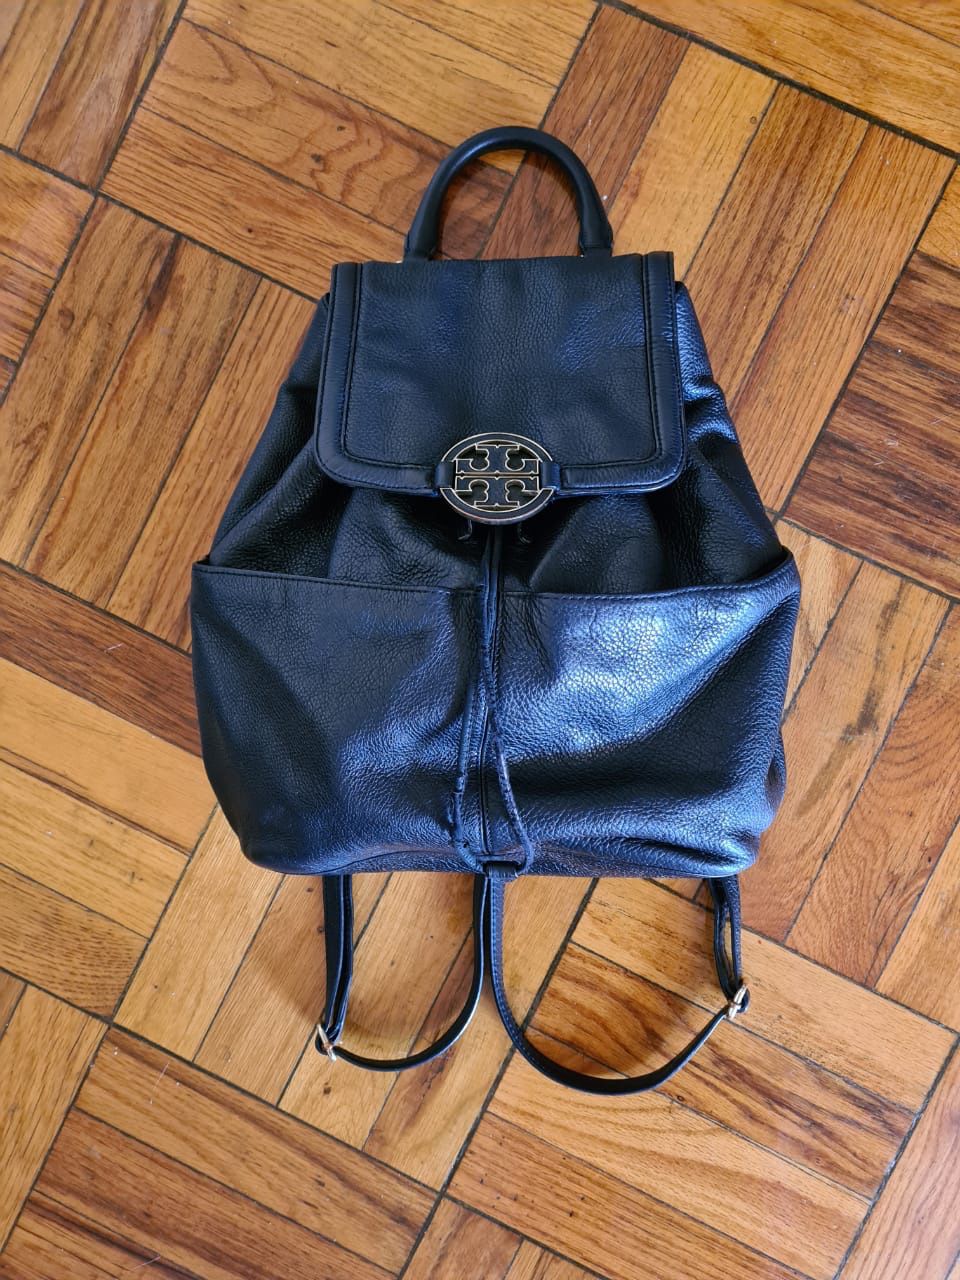 Tory Burch Black Leather Backpack